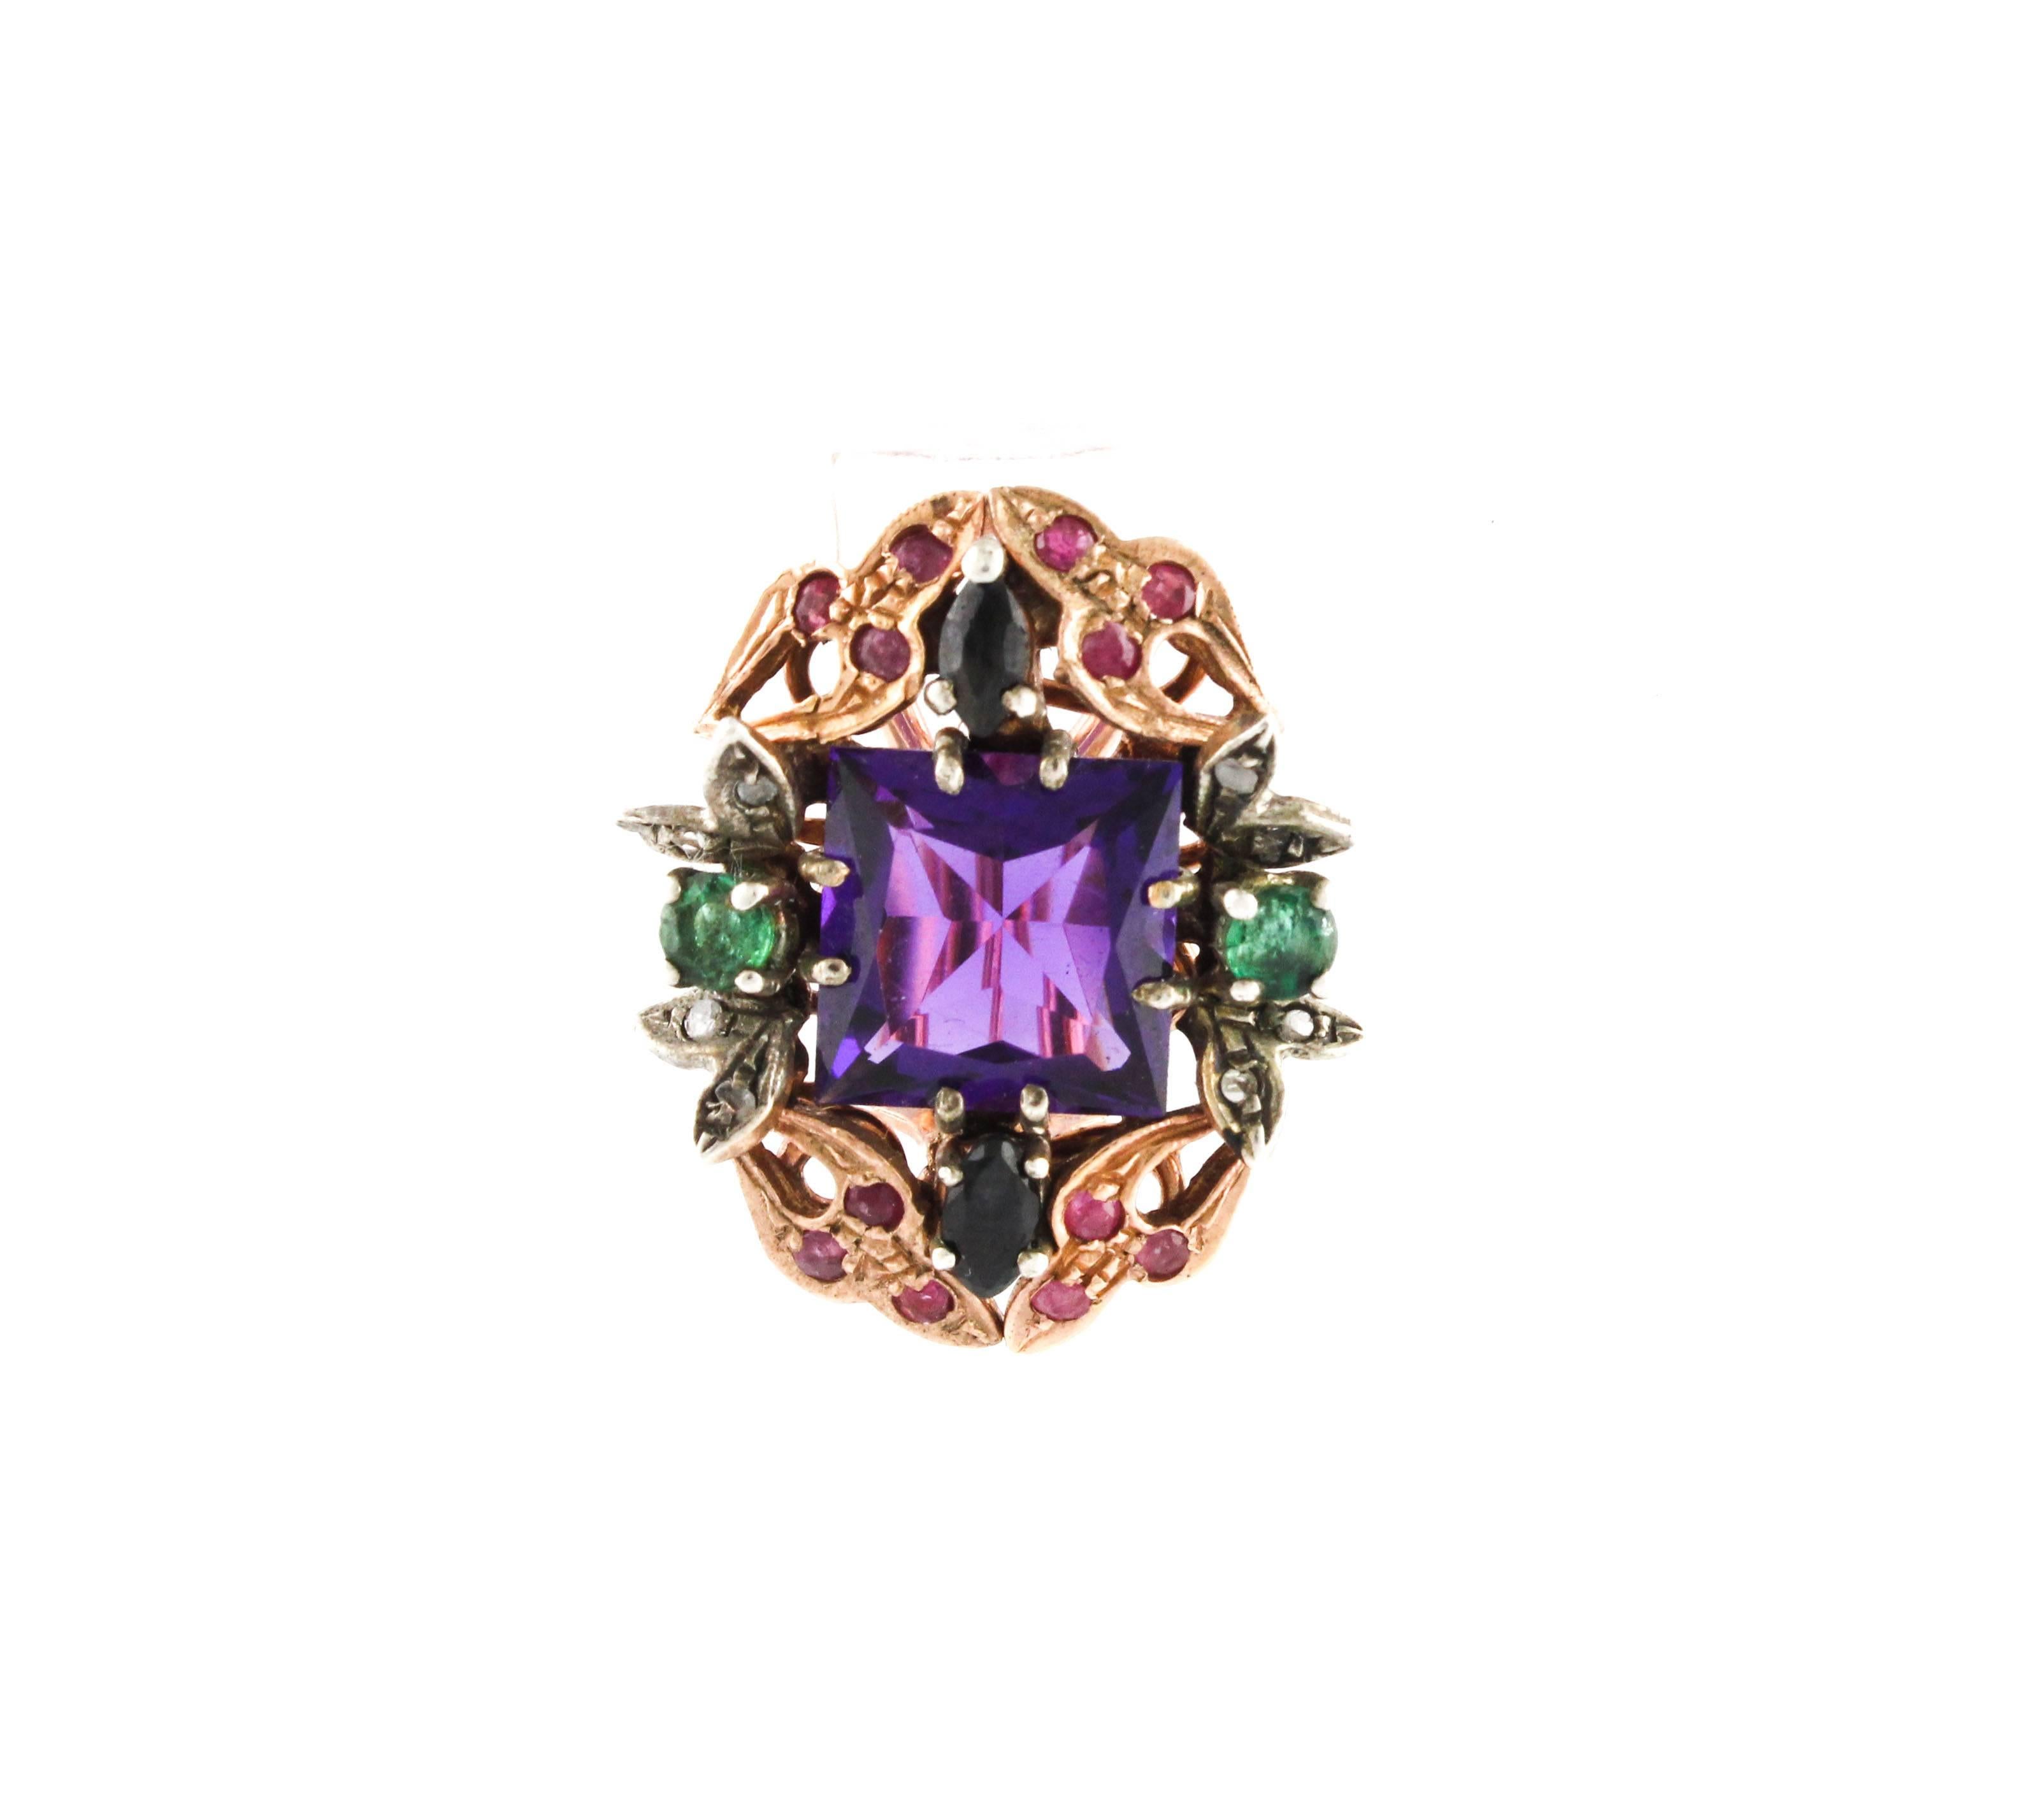 Fascinating earrings in 9kt rose gold and 10,90g silver with a spectacular amethyst centerpiece, encrusted with a sapphire, emerald,  sapphire and diamond crown.
Diamonds 0,08 ct
Ruby , Sapphires, Emeralds 2,69 ct
Ametiste 8,12 ct
Total weight 11,10